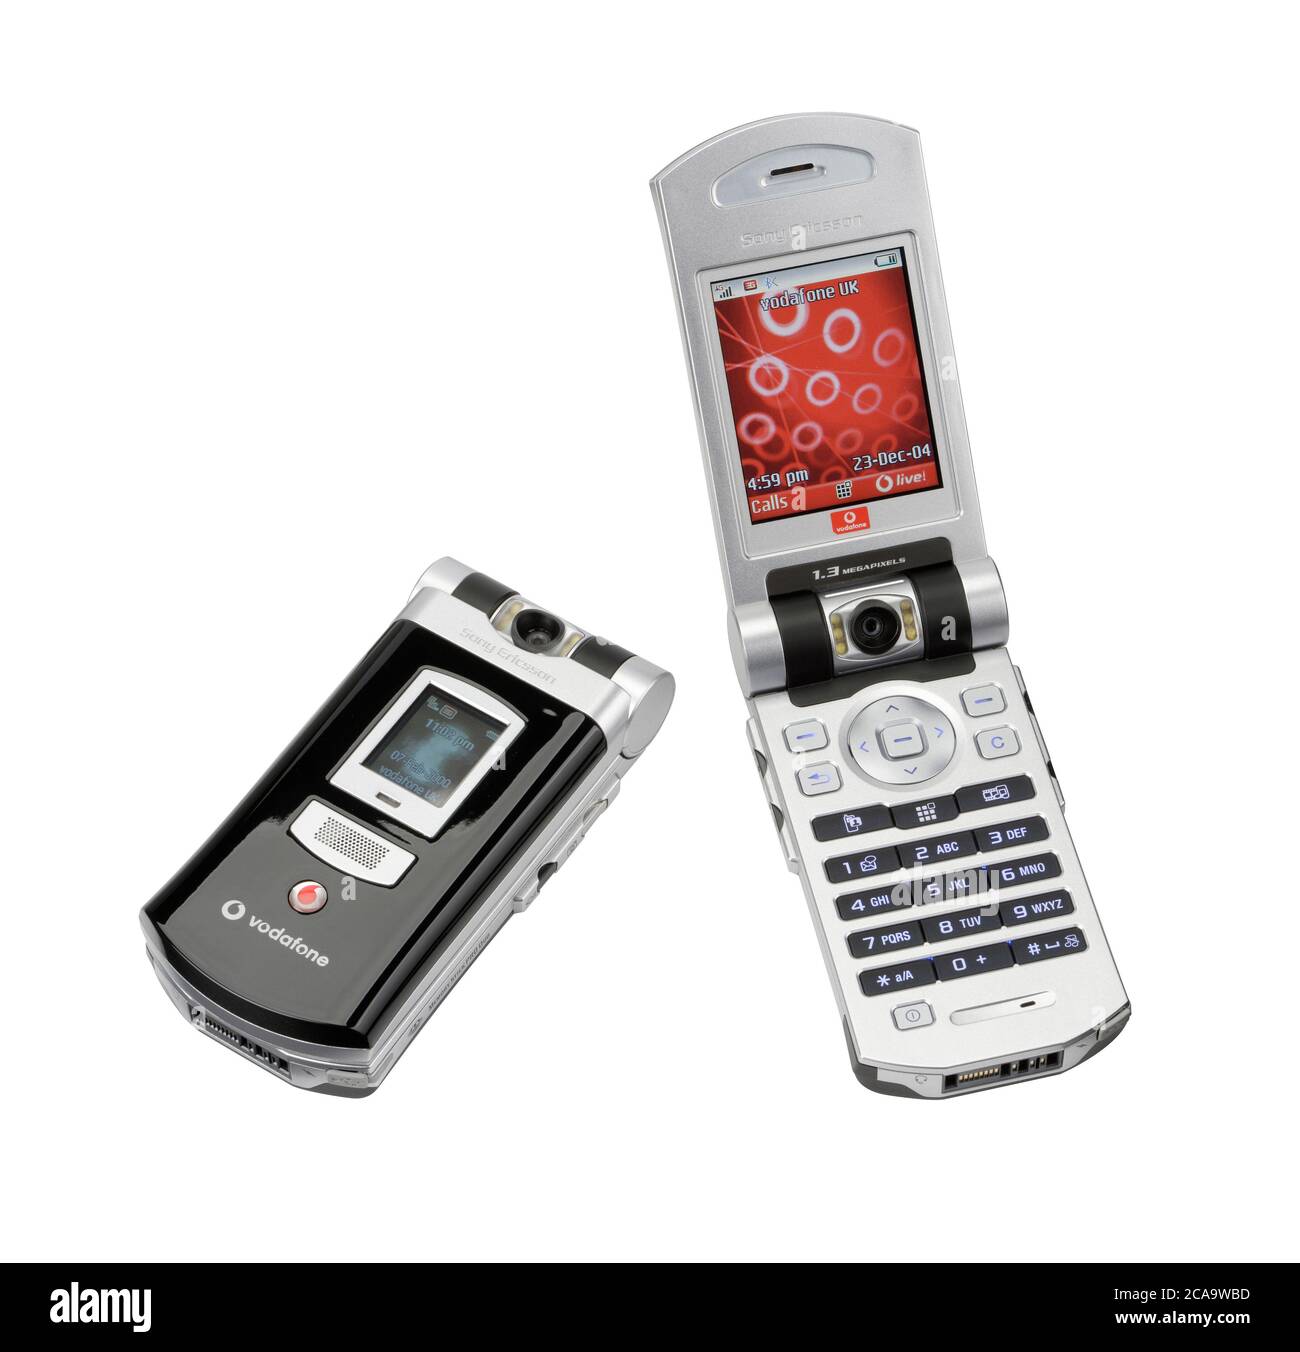 A Sony Ericsson mobile phone from year 2004. Vodafone tied contract  telephone that has a flip open mechanism Stock Photo - Alamy